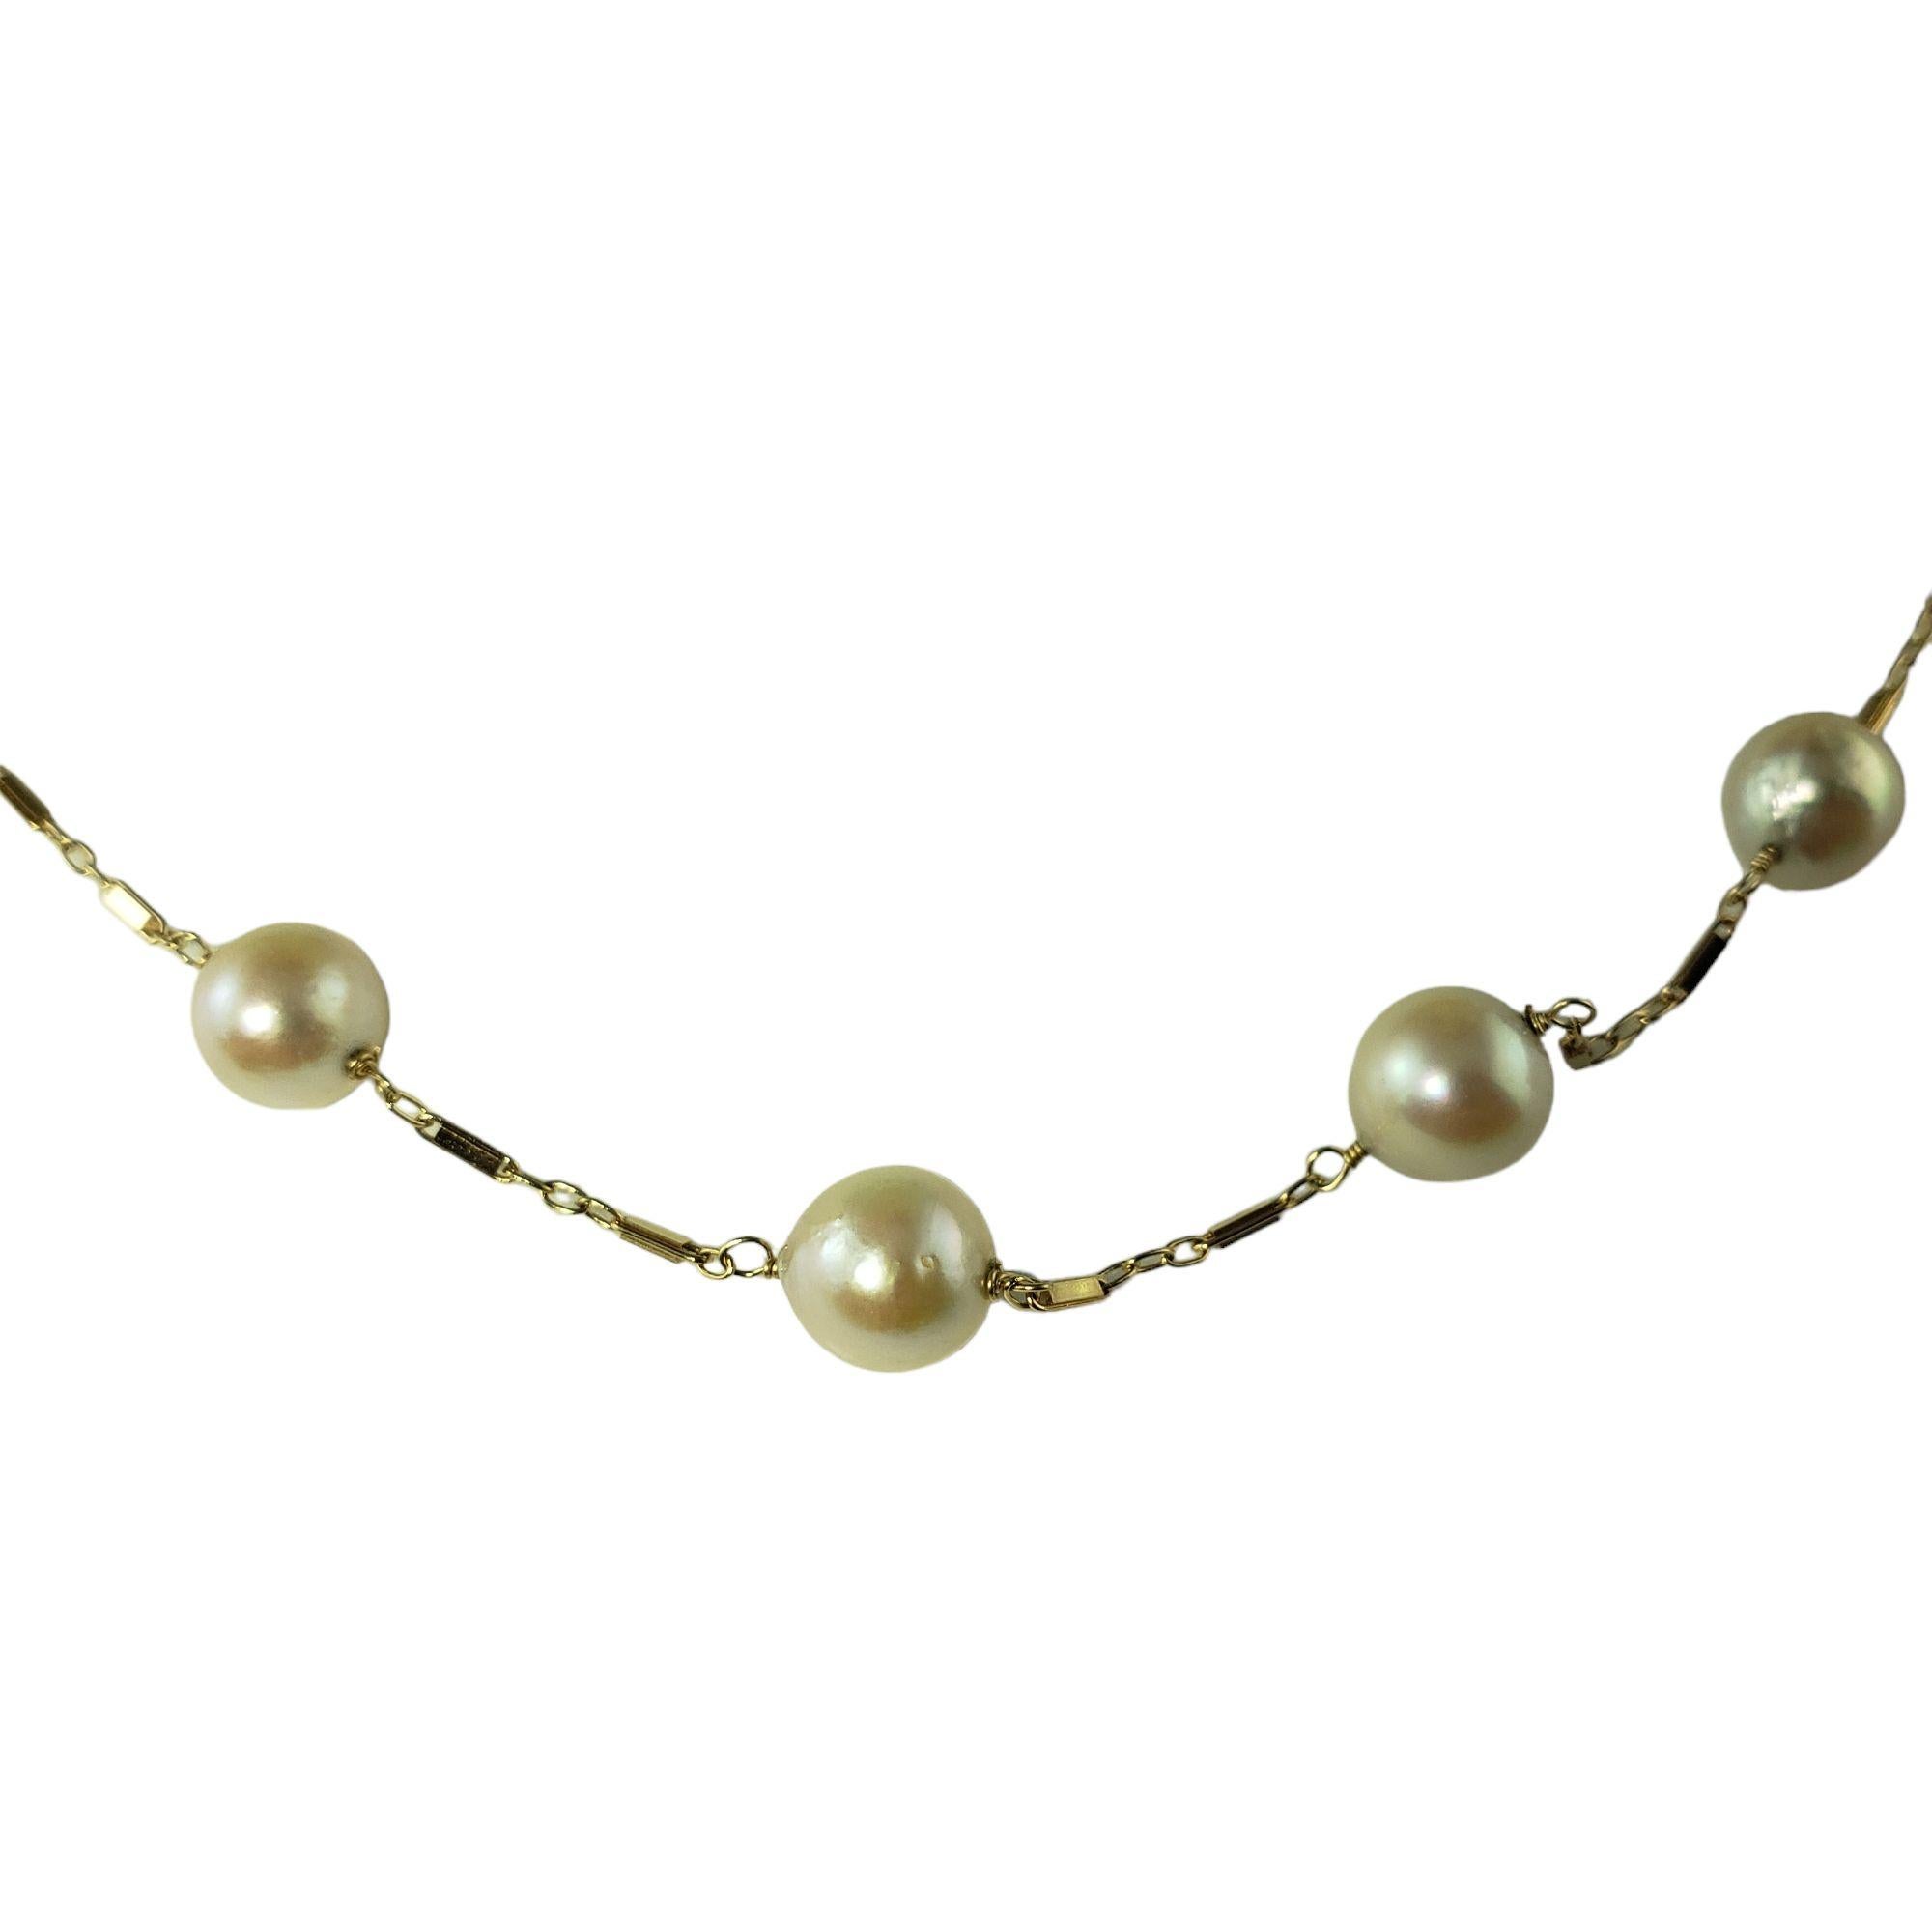 This lovely necklace feature 13 cultured freshwater pearls (8 mm each) set on a 14K yellow gold link chain.

Size:  17.5 inches

Weight:  12.0 gr./  7.7 dwt.

Stamped:  14K

Very good condition, professionally polished.

Will come packaged in a gift